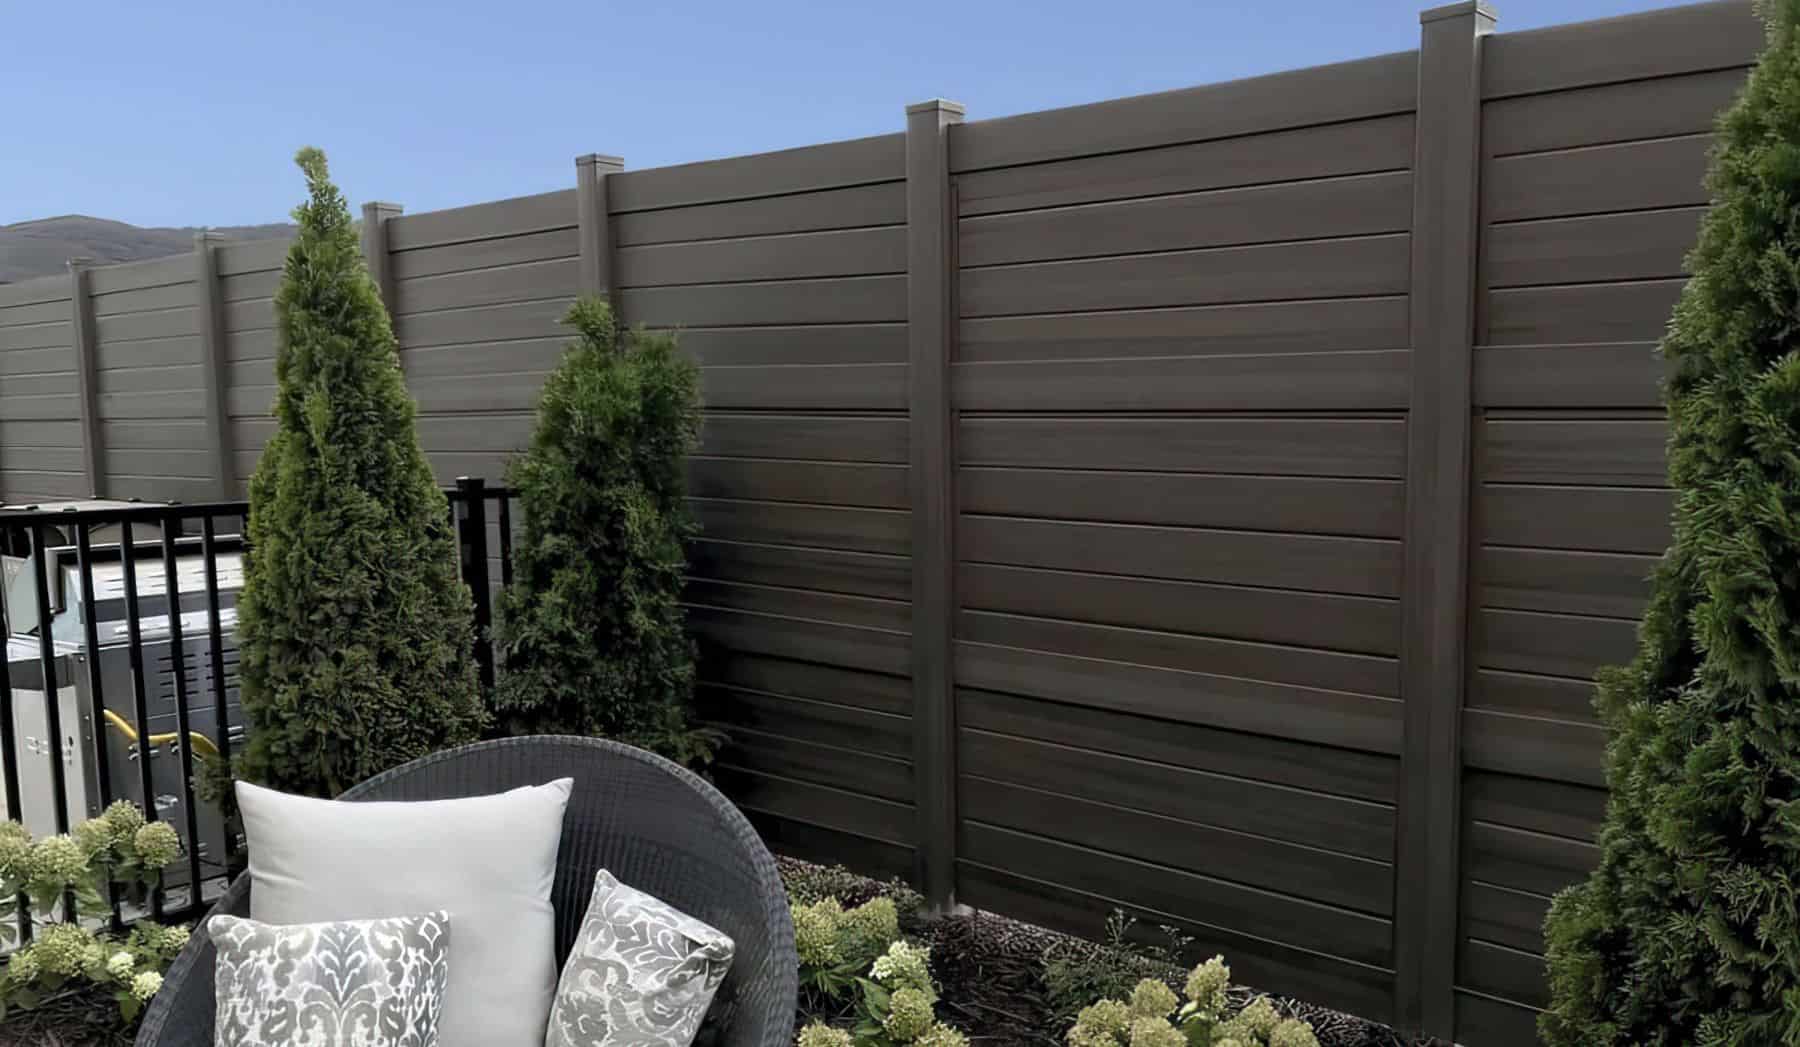 Tall brown vinyl fence with horizontal slats behind short trees in backyard garden with outdoor seating